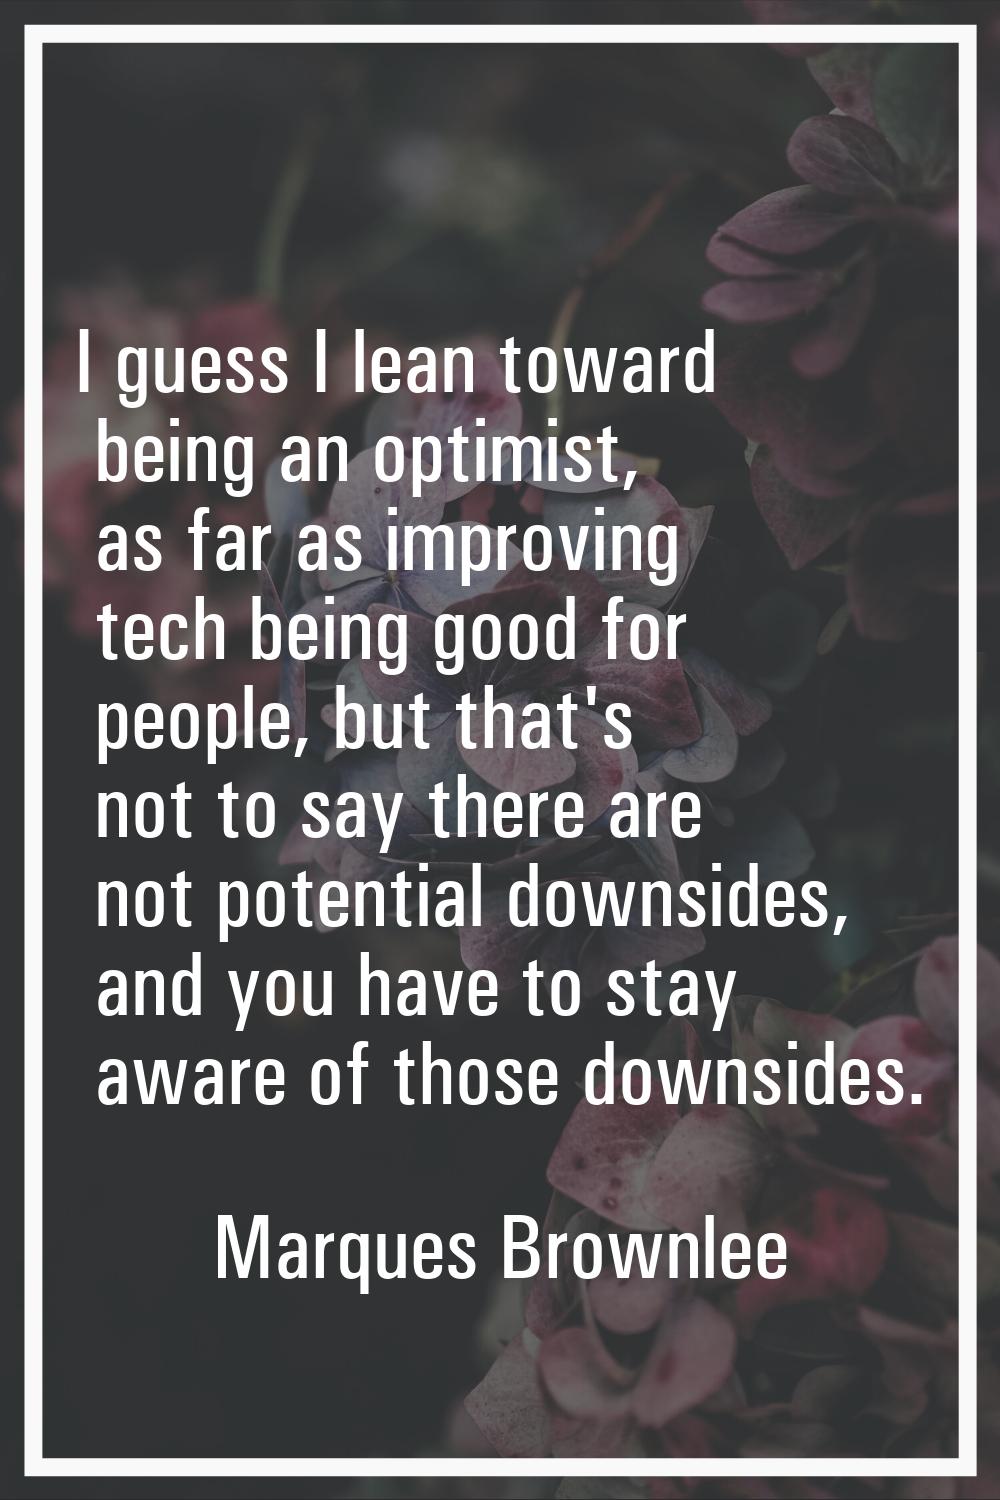 I guess I lean toward being an optimist, as far as improving tech being good for people, but that's